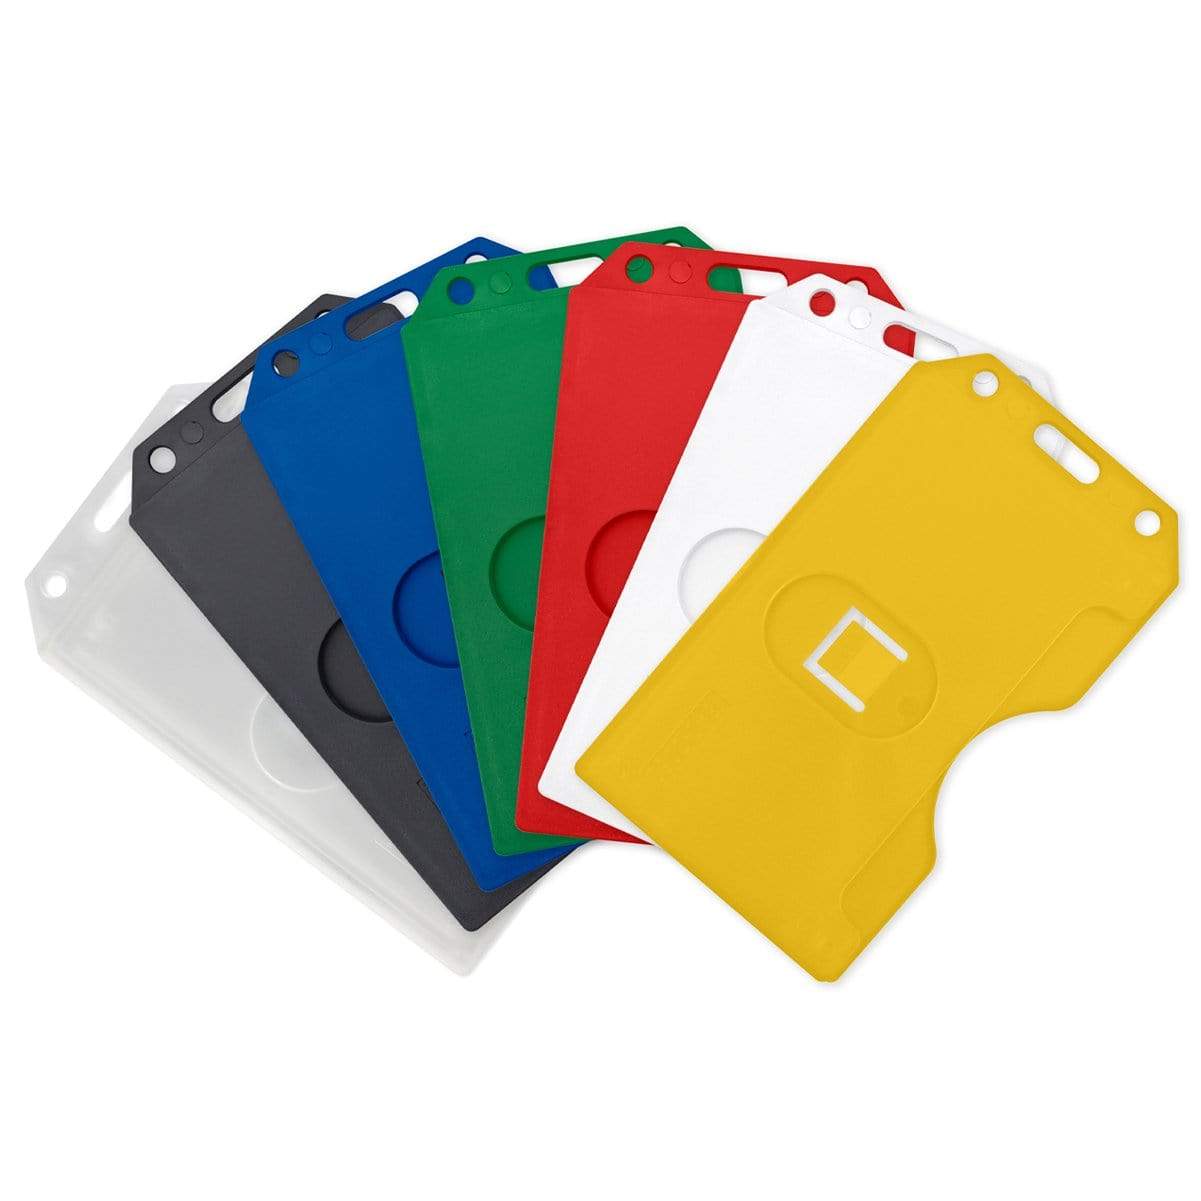 A group of different colored plastic cards neatly organized in a 2 Sided Rigid Vertical MultiCard Badge Holder - Hard Plastic Multiple ID Card Holder (1840-308X).